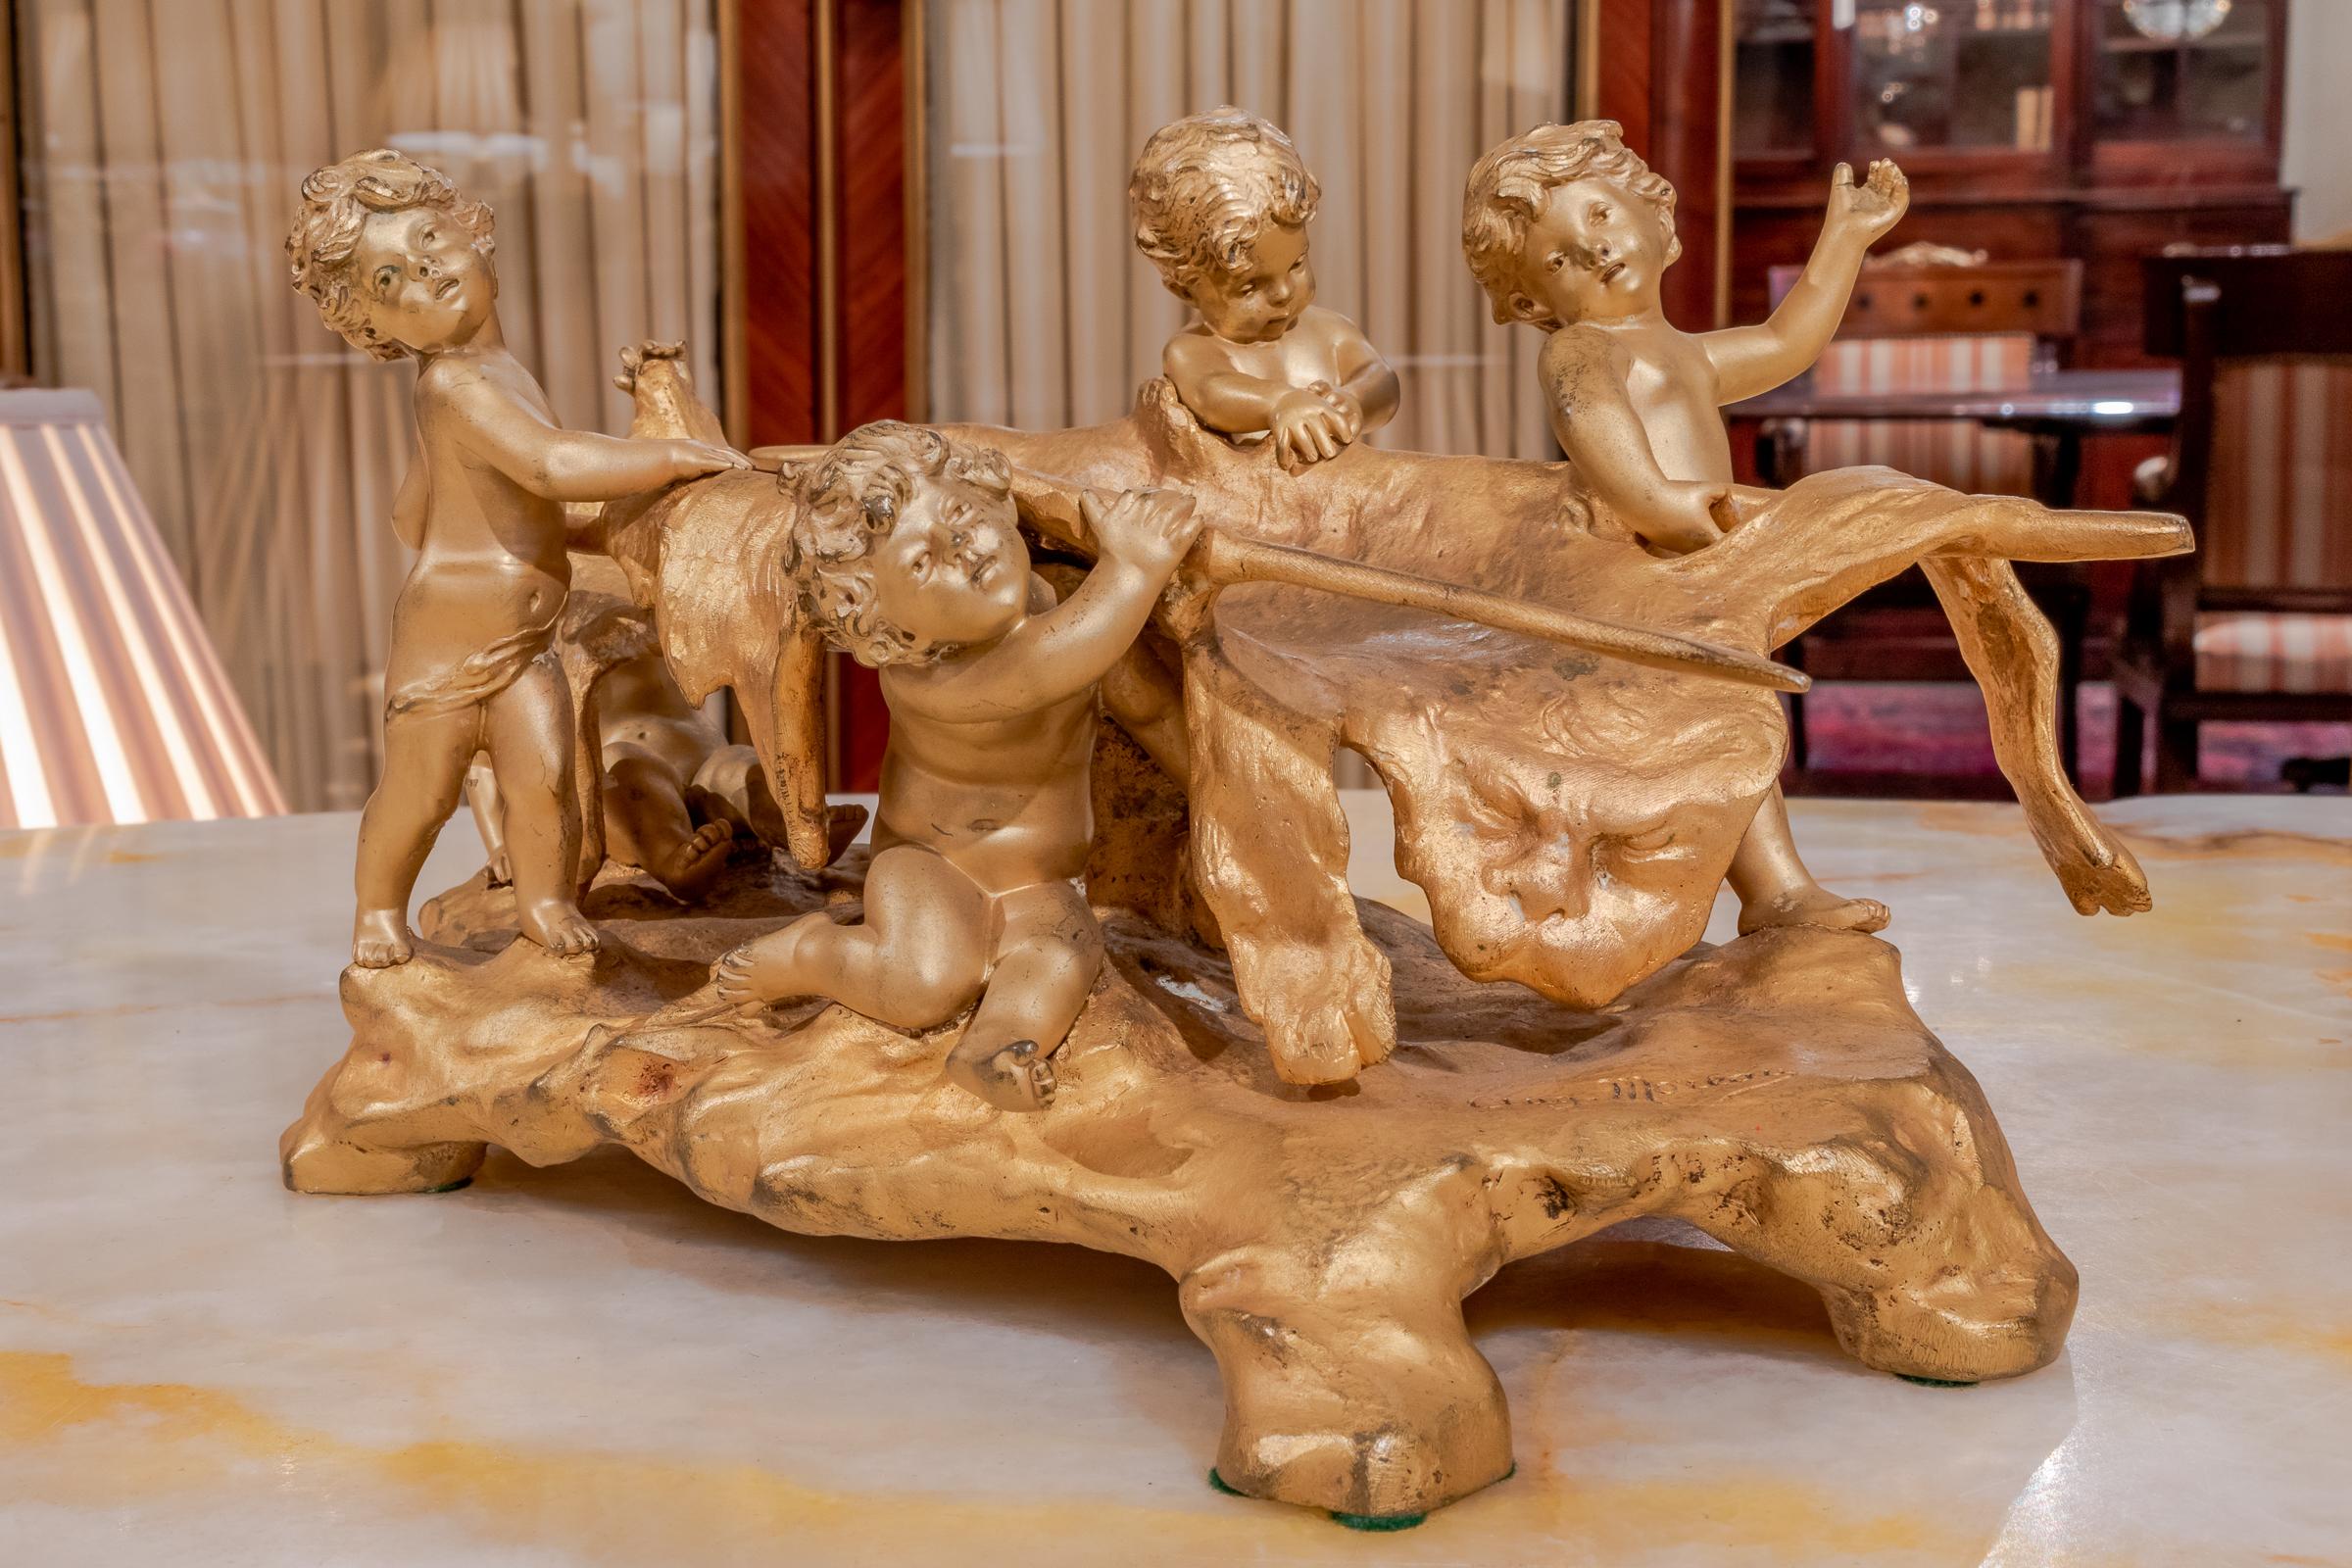 19th century French gilt bronze by August Moreau of a group of cherubs with their kill after the hunt.